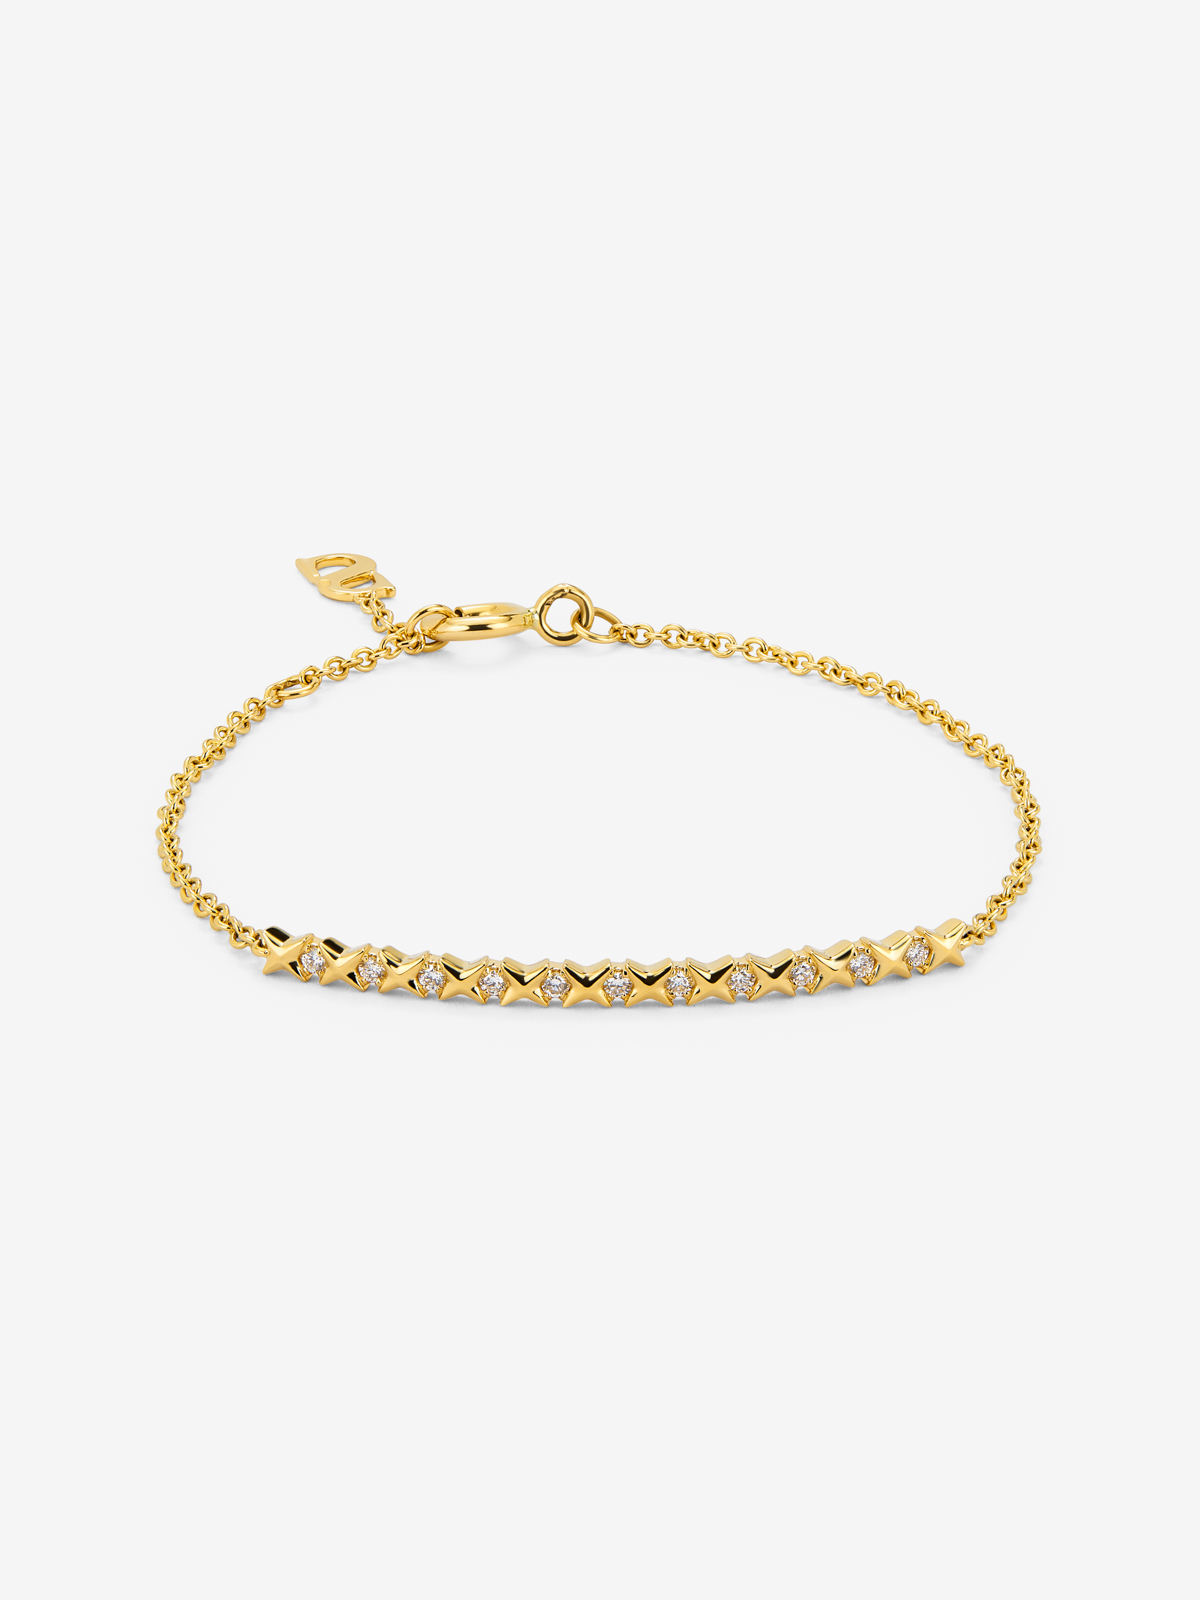 18K yellow gold bracelet with 11 brilliant-cut diamonds with a total of 0.16 cts